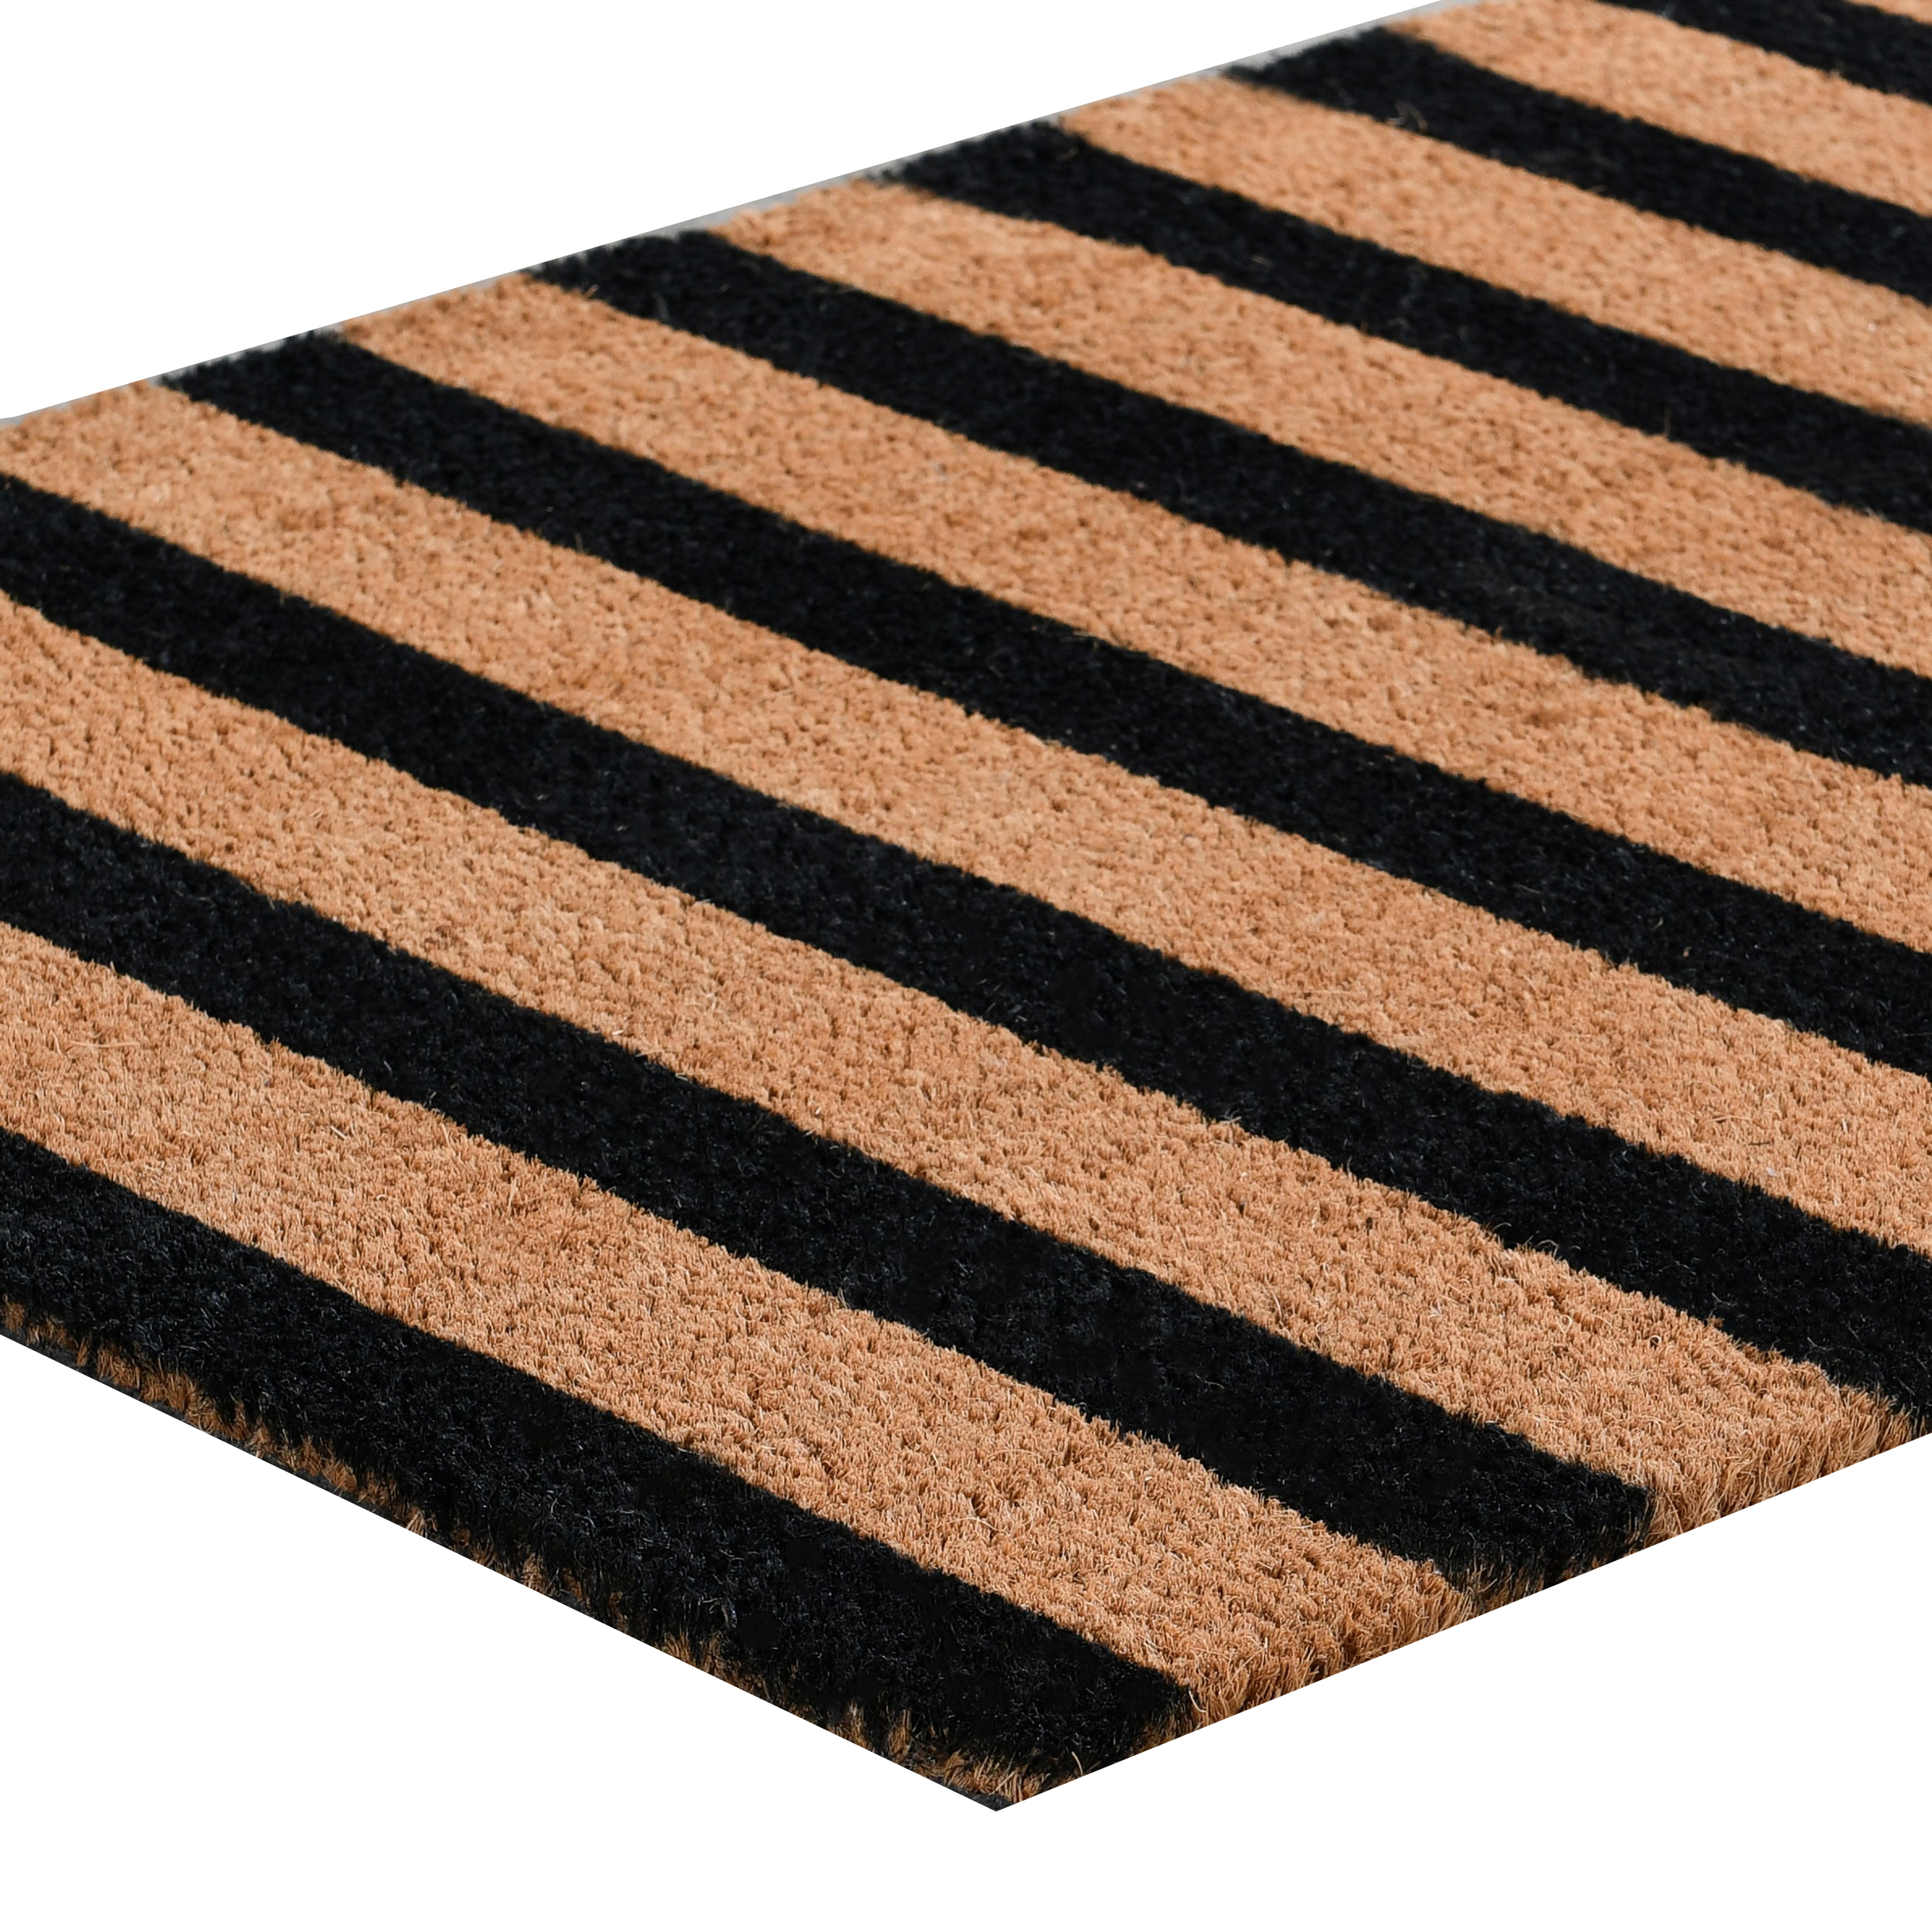 Oy 24 X 57 Coir Doormat With Brown And Black Striped Pattern, PVC Backing- Saltoro Sherpi